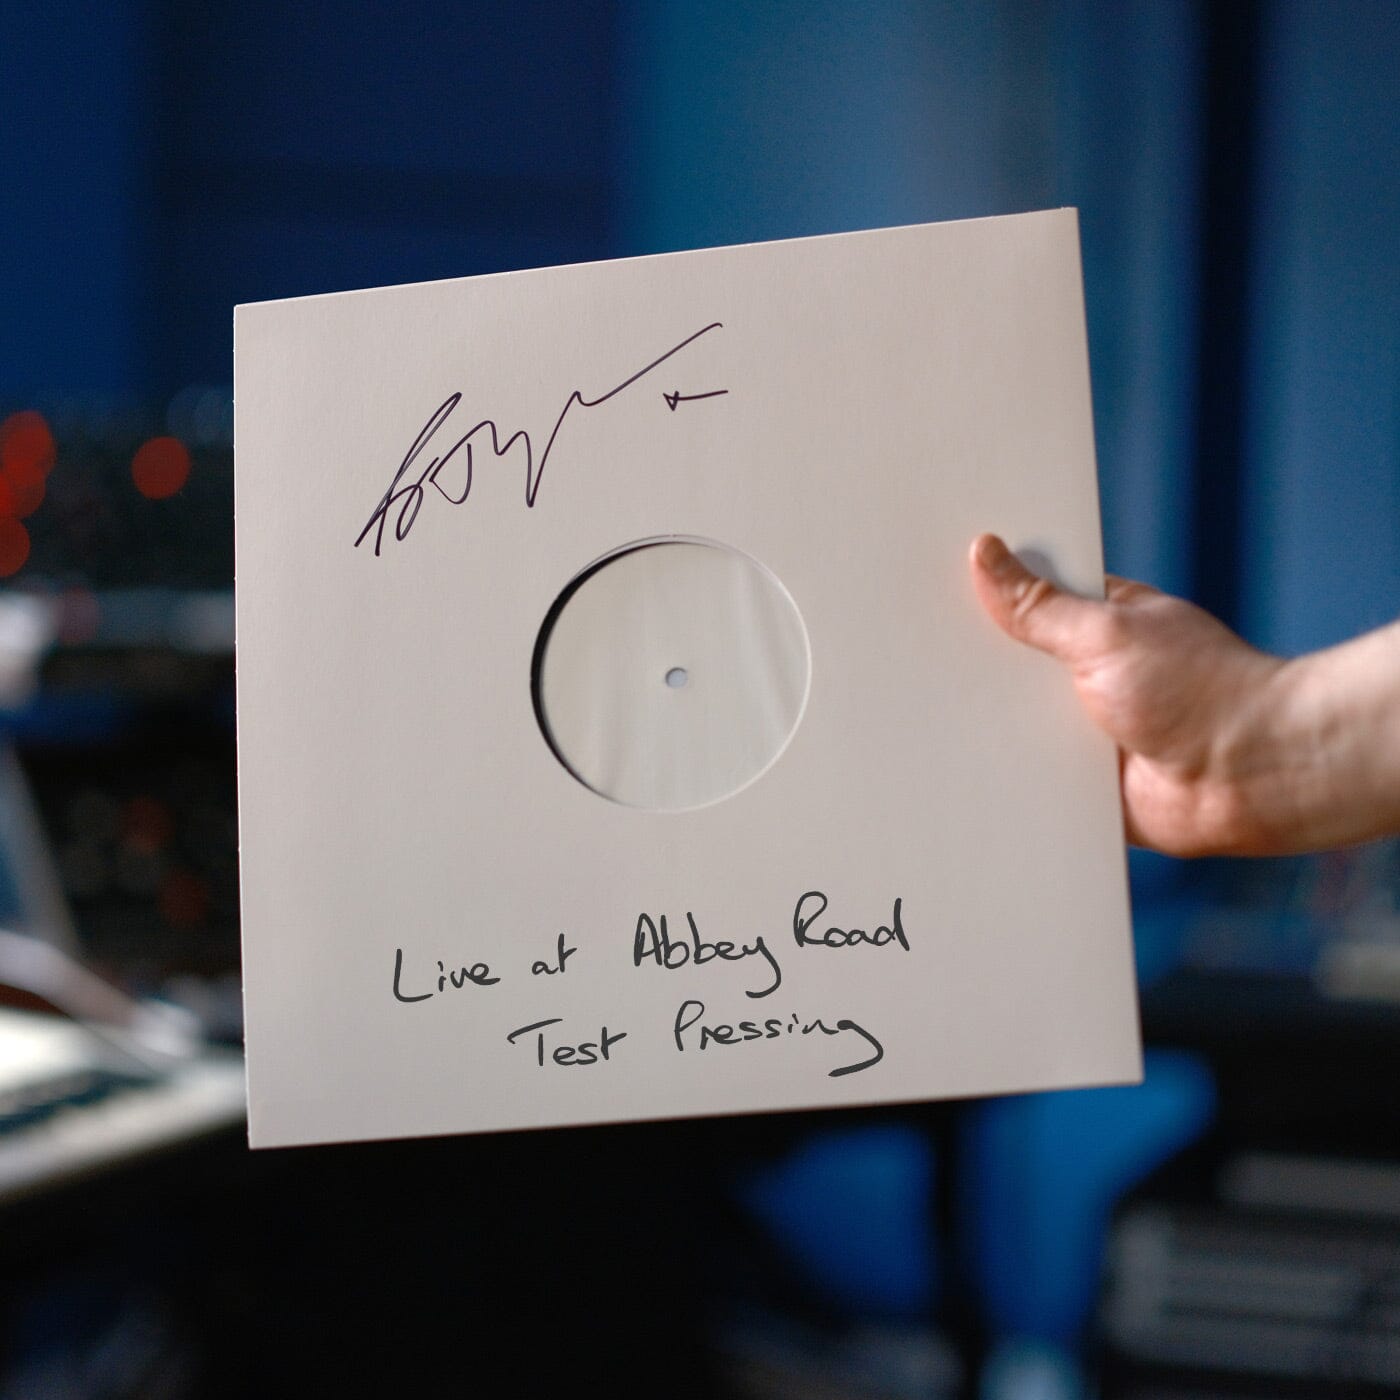 Live at Abbey Road - Signed & Numbered Test Pressing | RJ Thompson | Official Website & Store